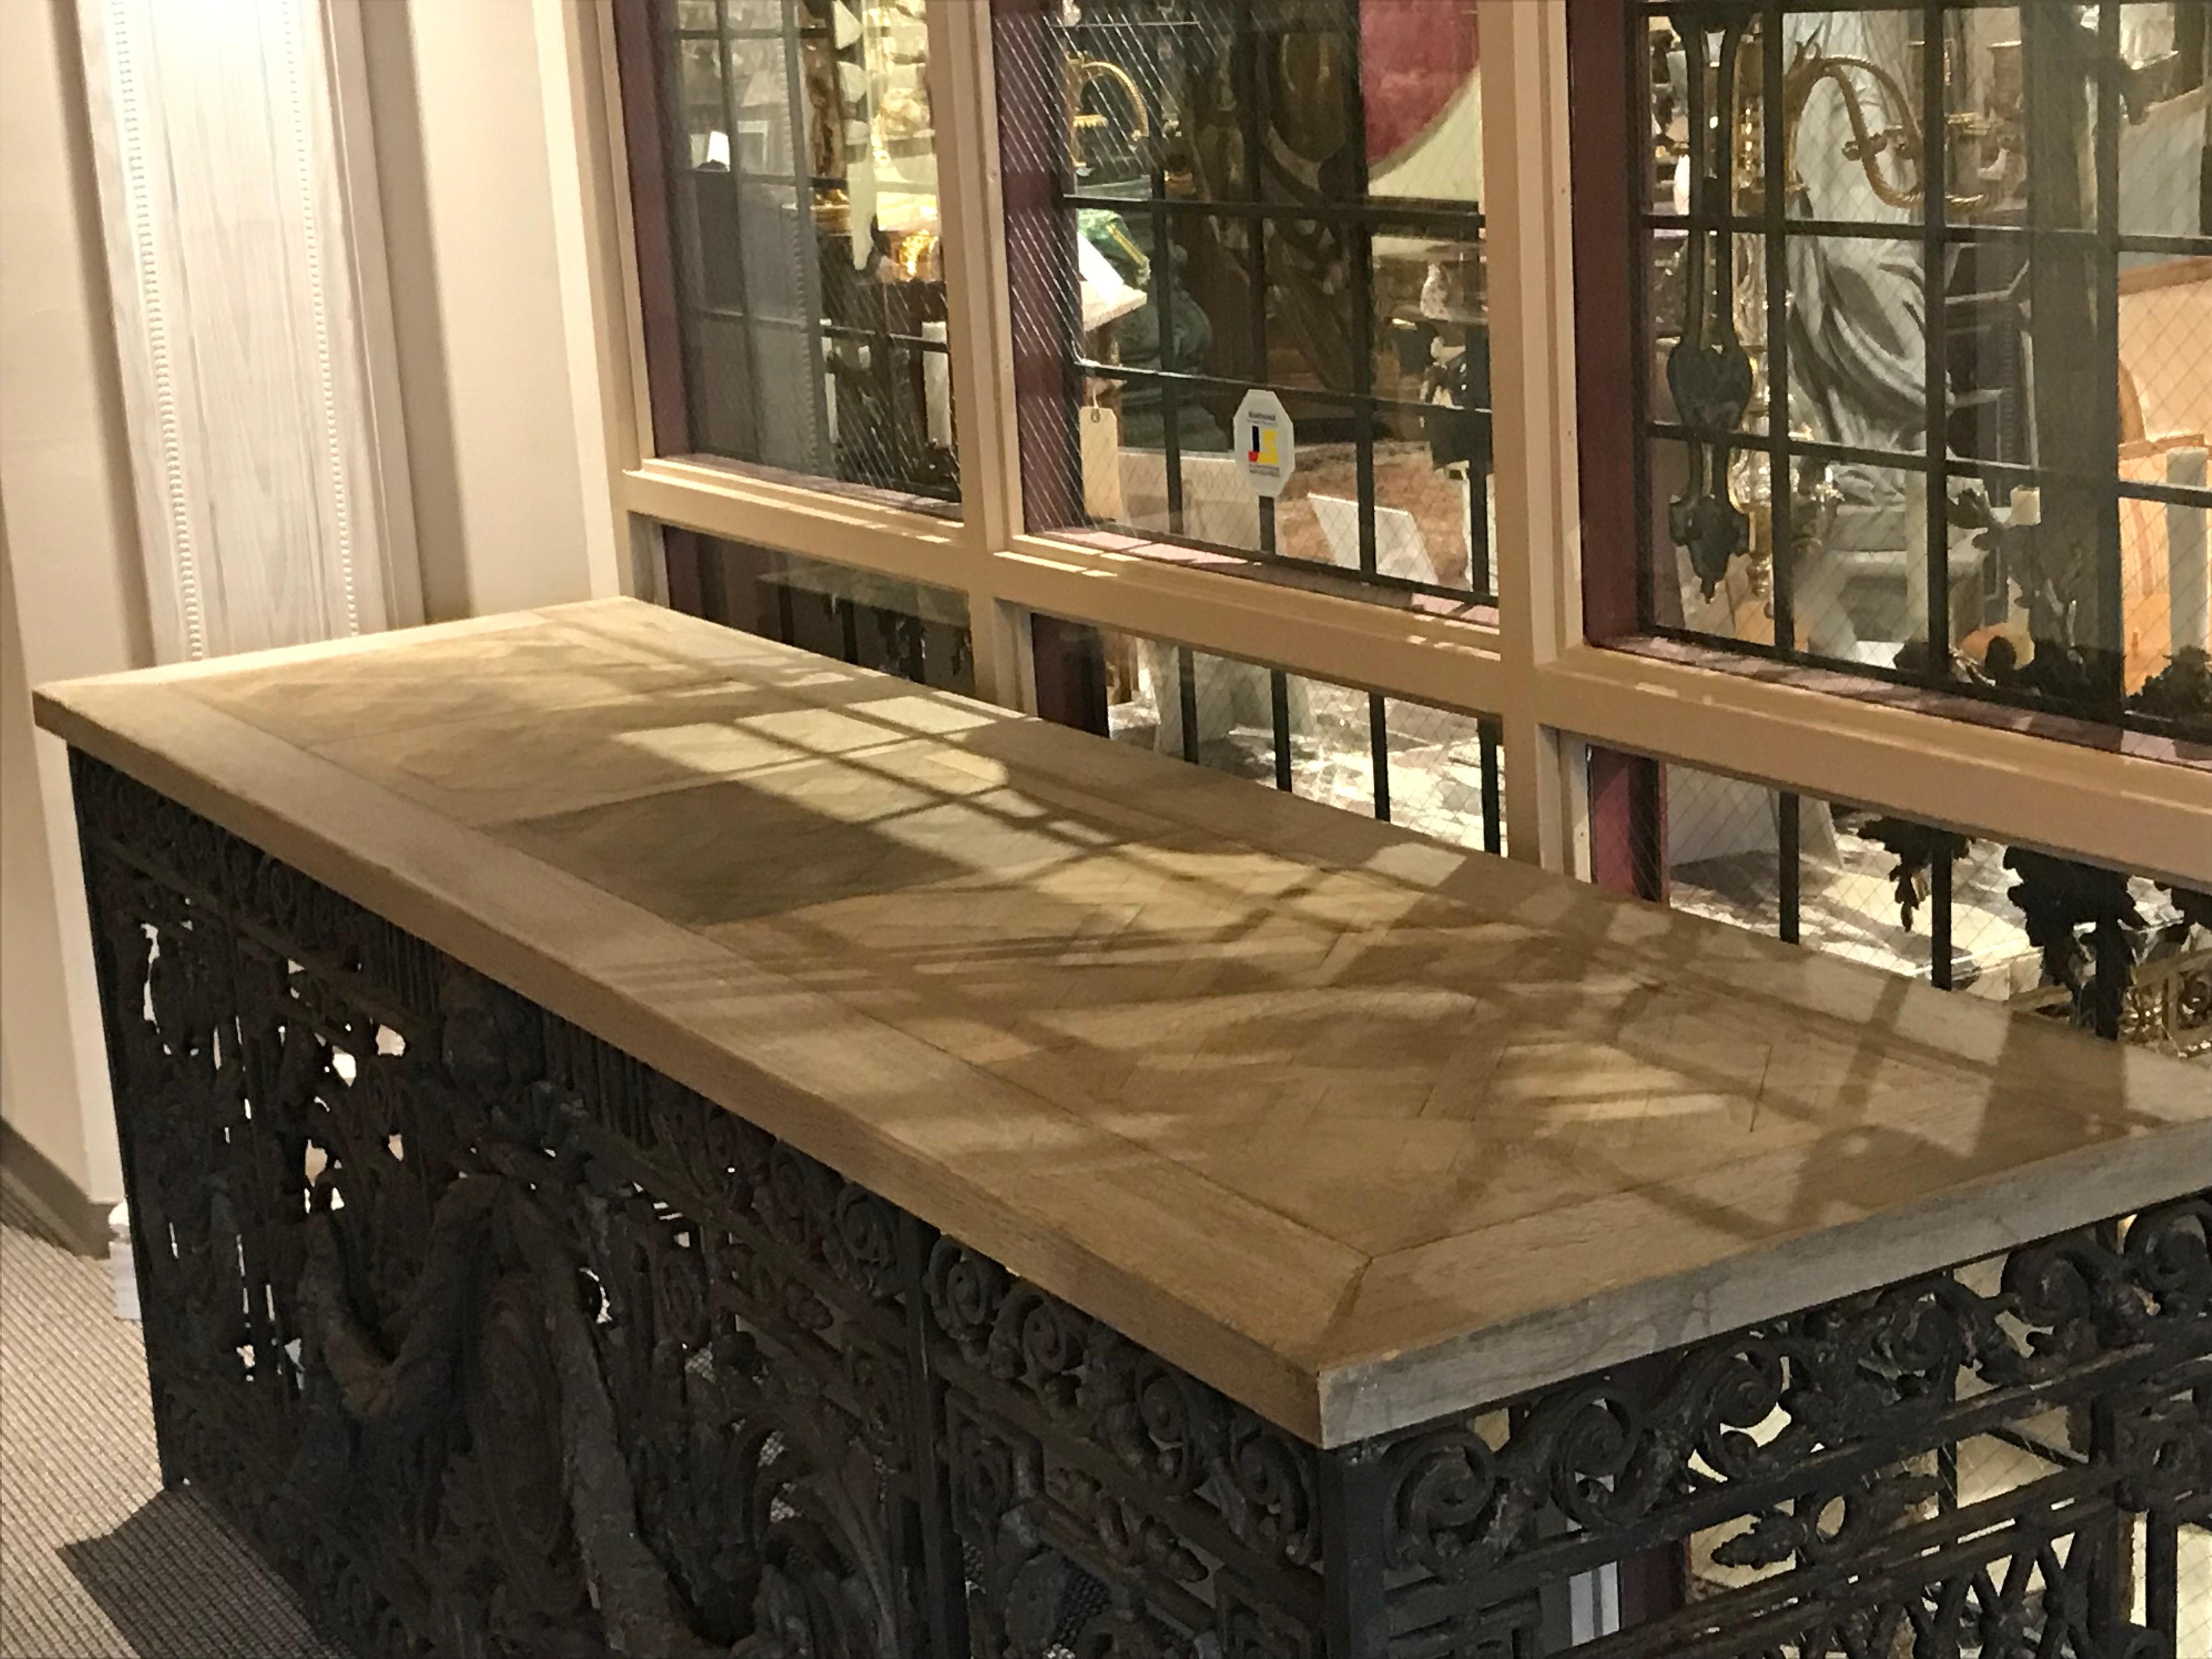 A Superb French Cast iron balcony, Renaissance style, attributed to Val D'Osné foundry cooperative in Paris, with trilage sides, female images, lions and laurel guards, now turned into console. The wooden top featuring Antique Oak Versailles Parquet